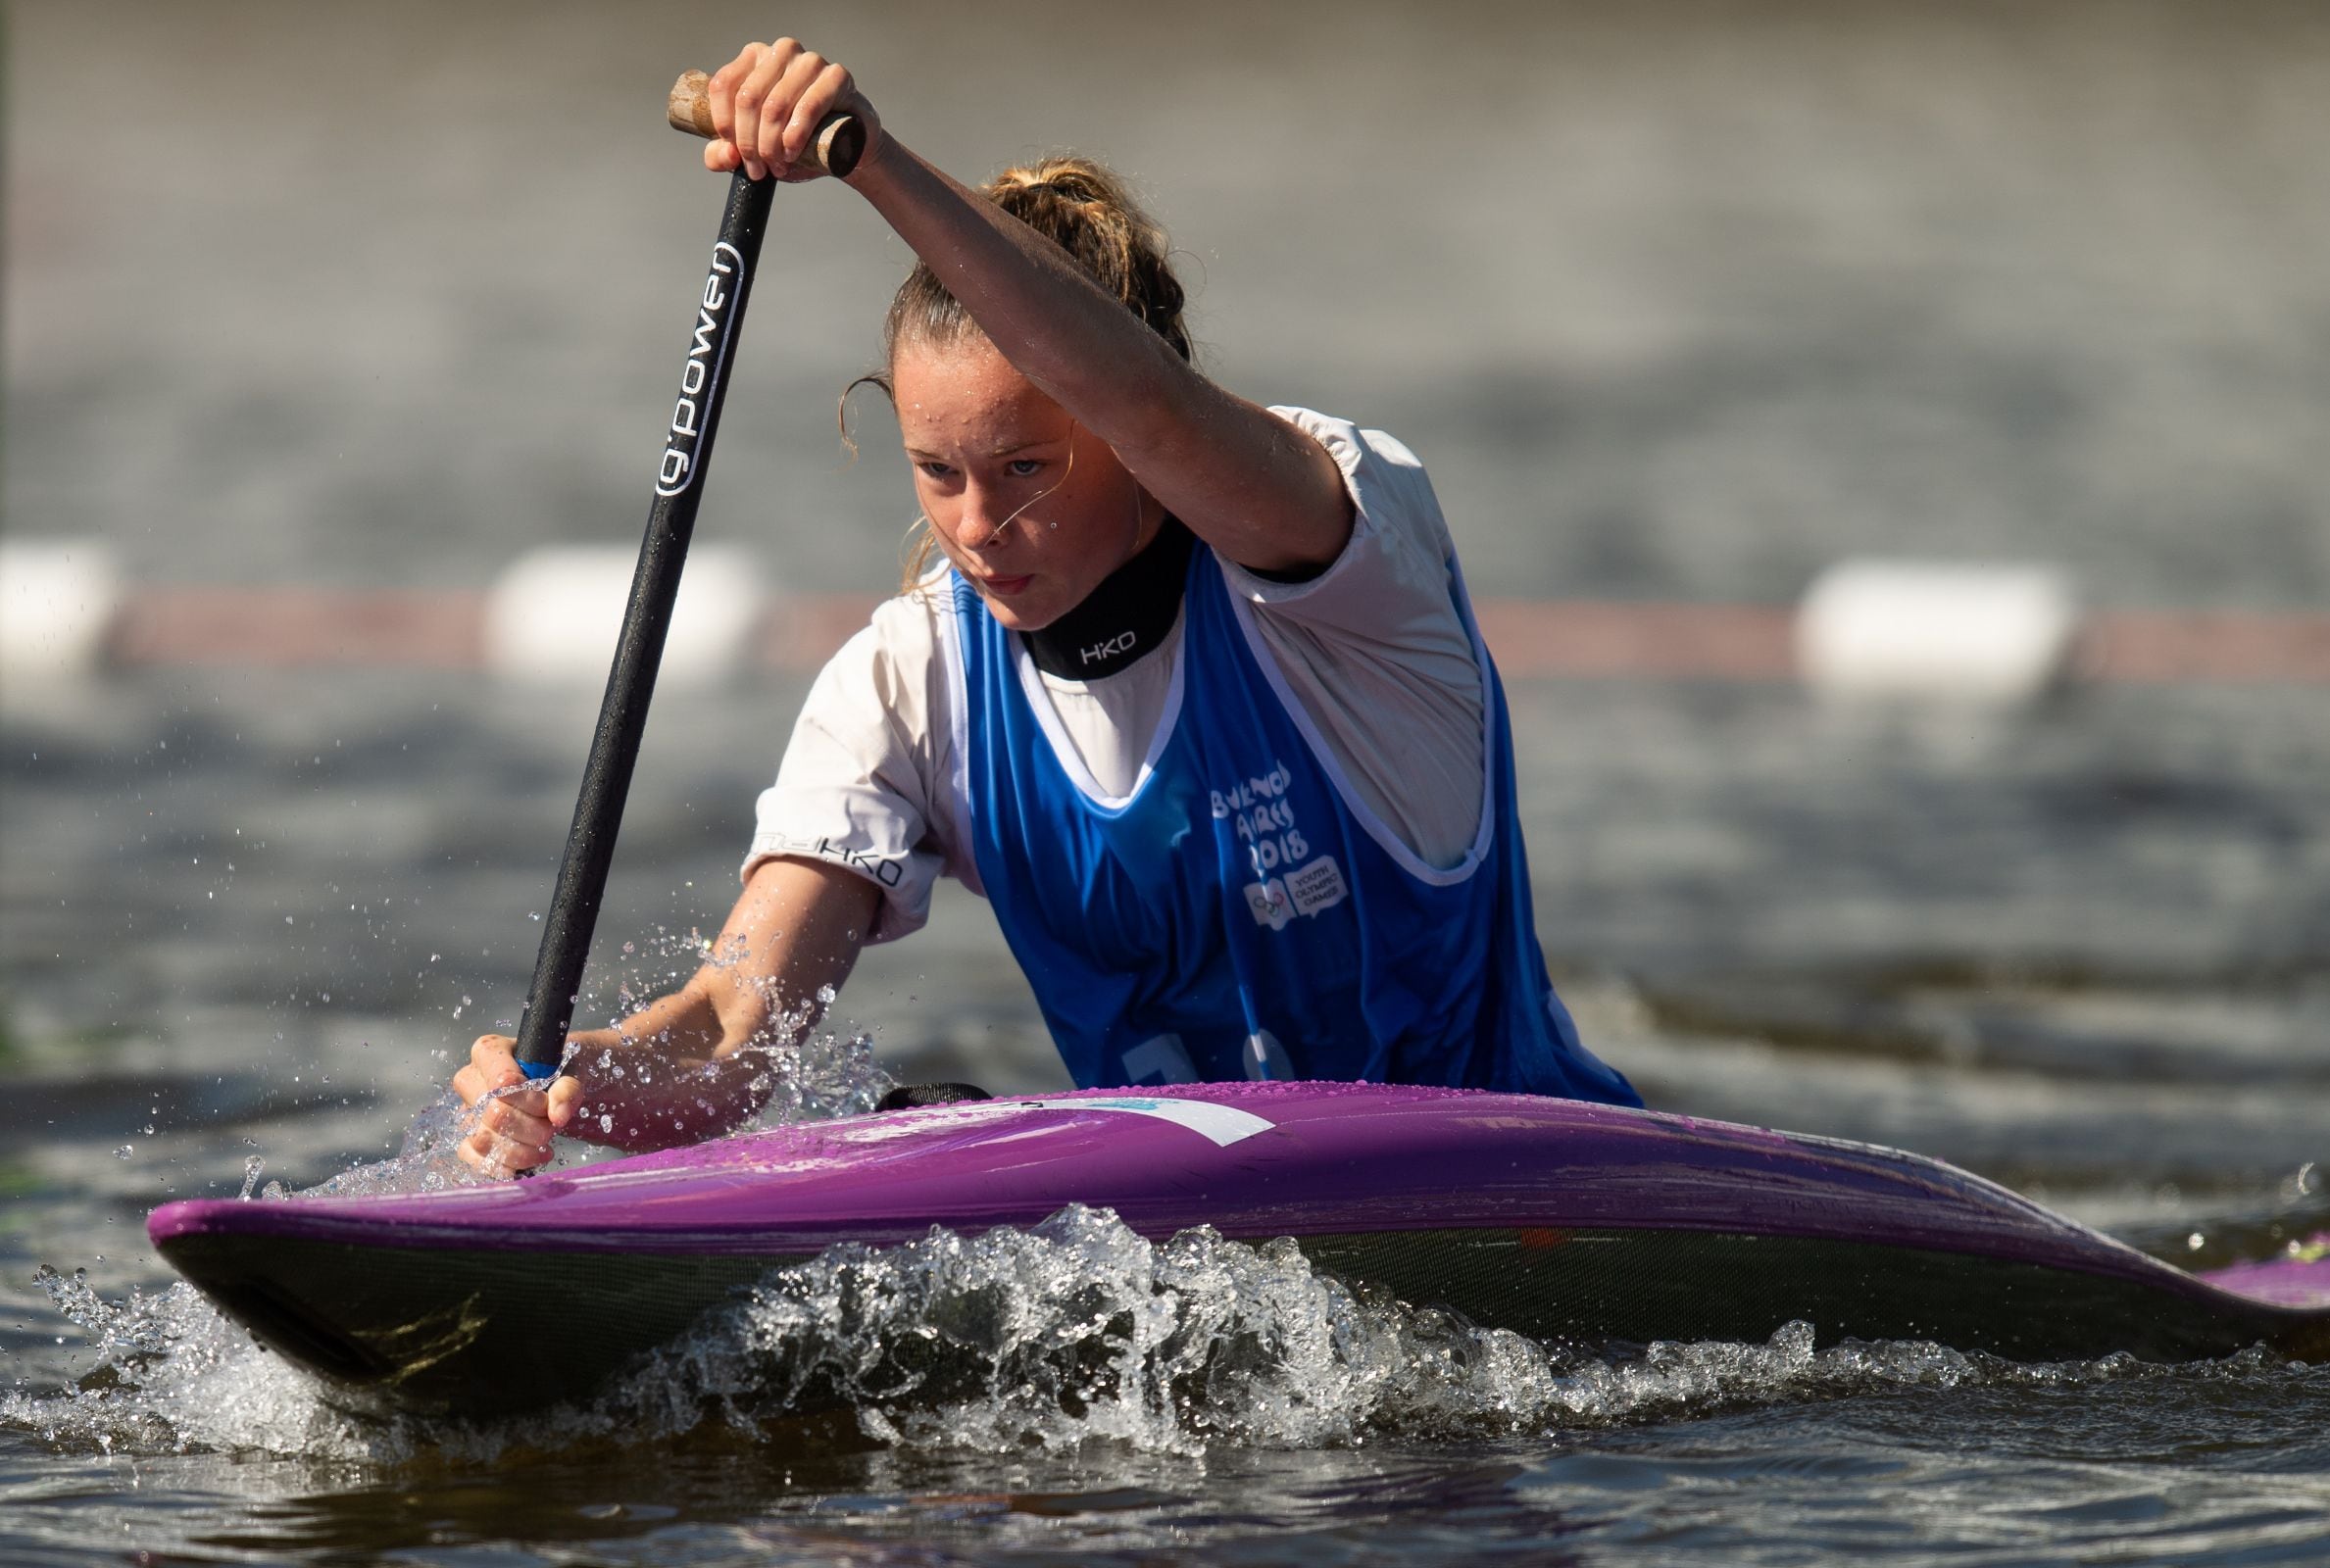 Buenos Aires 2018 - Canoe - C1 - Obstacle Slalom - Women